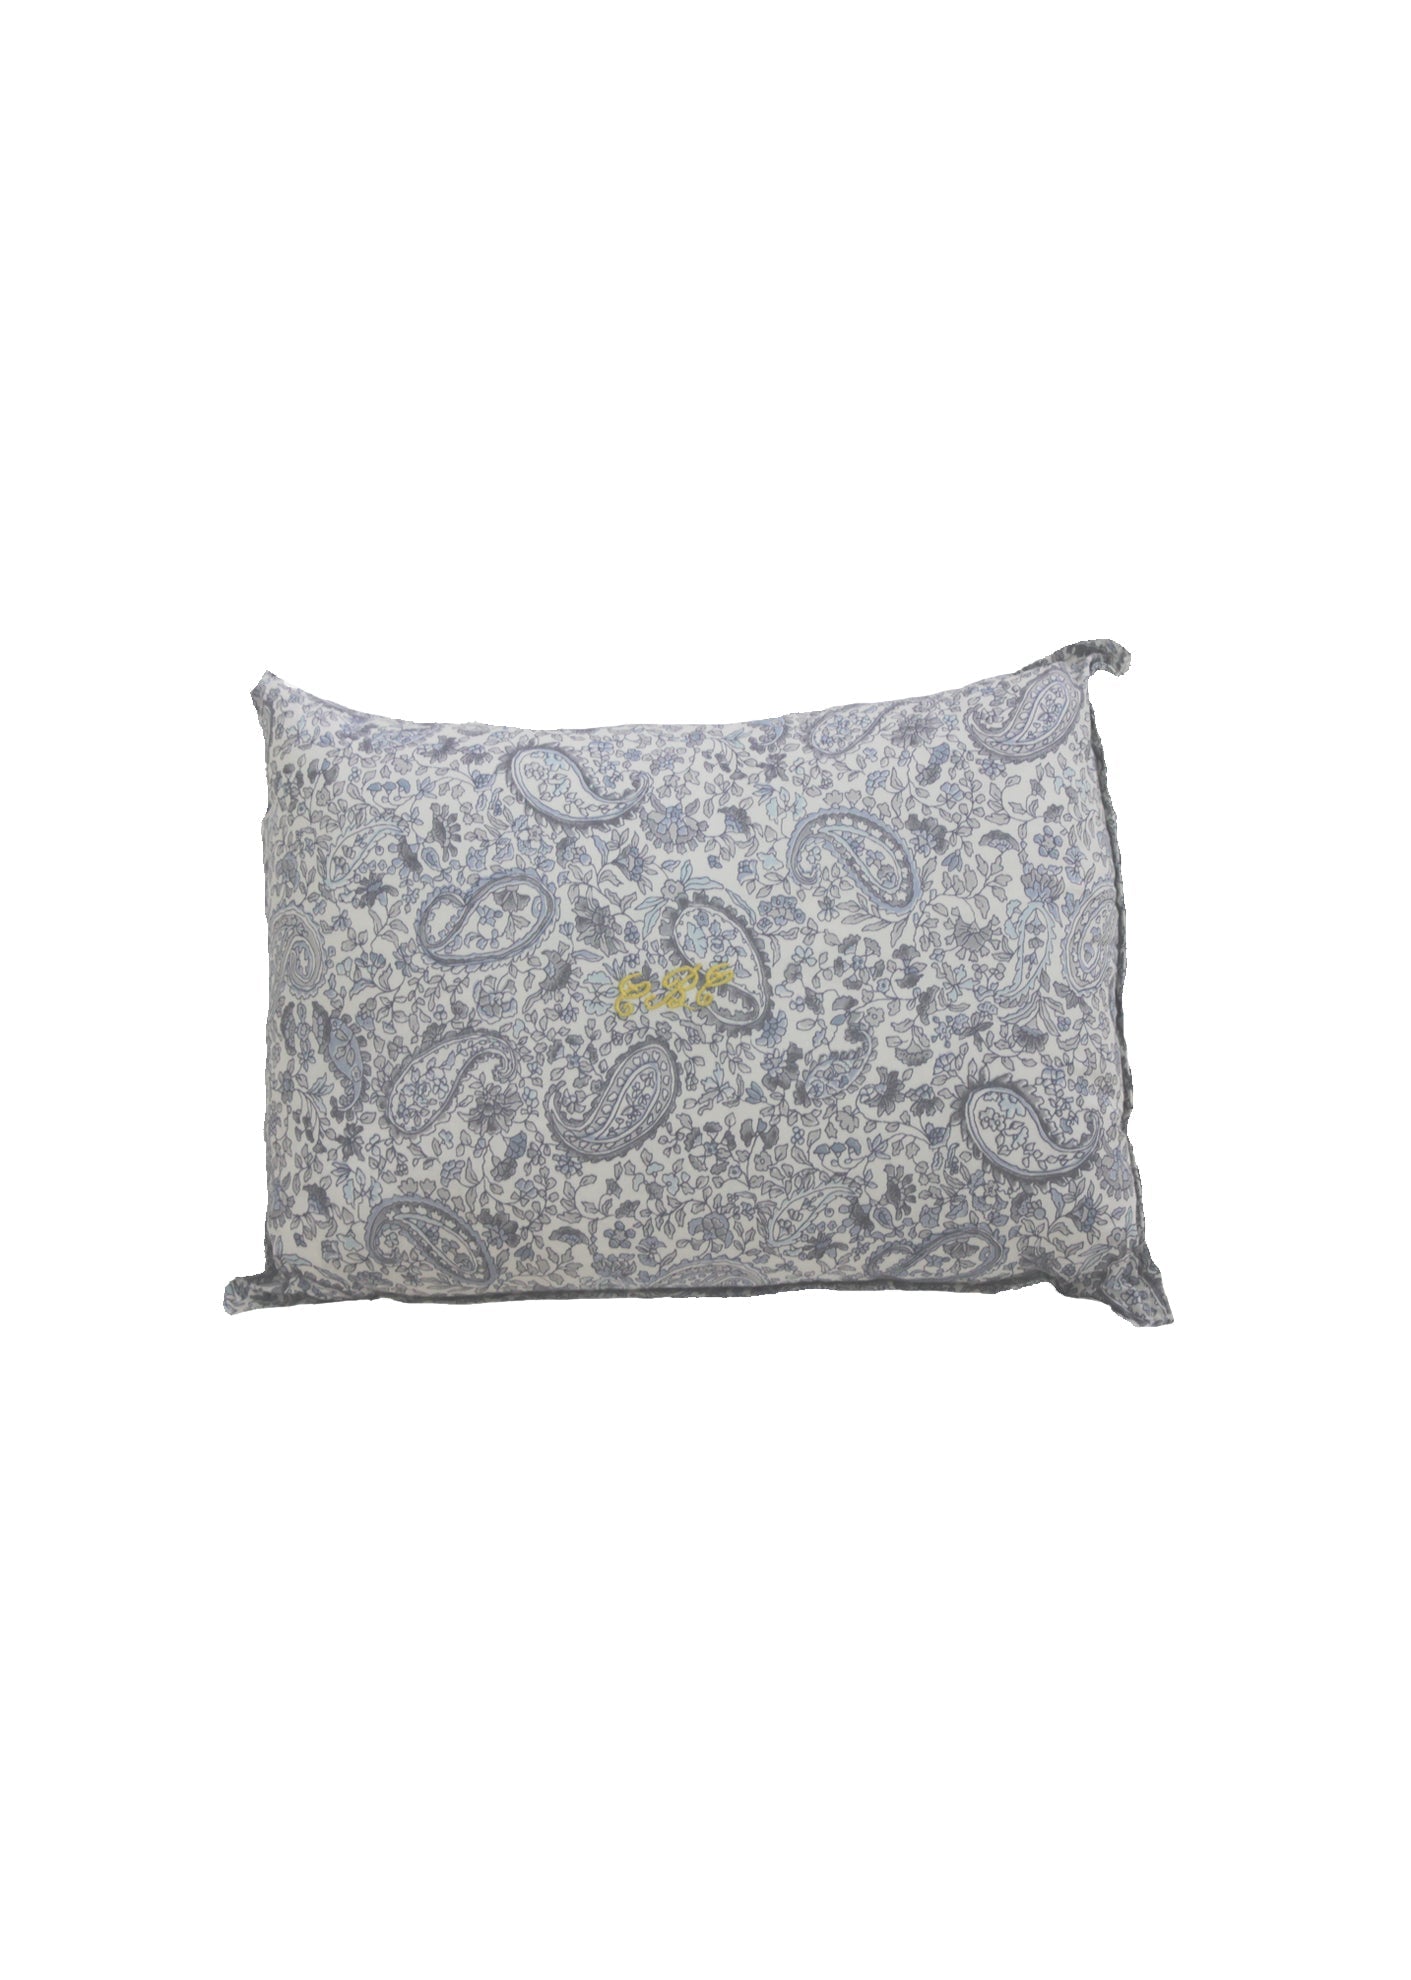 SCATTER CUSHION - BLUE PAISLEY